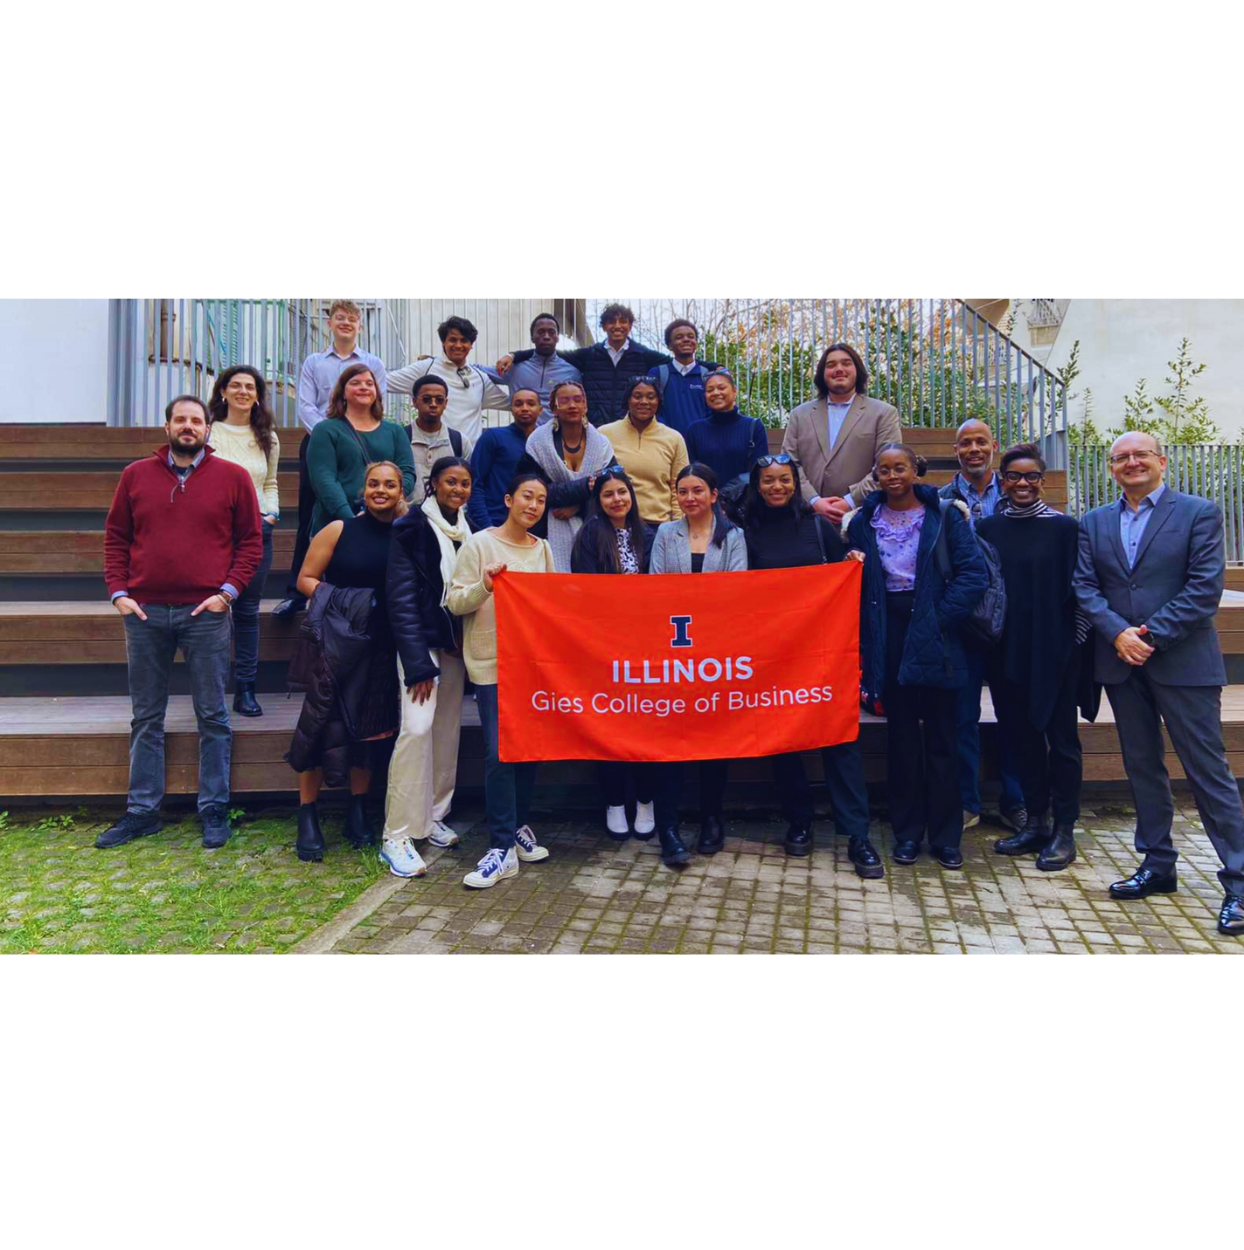 AUEB hosted faculty and students from the University of Illinois at Urbana Champaign